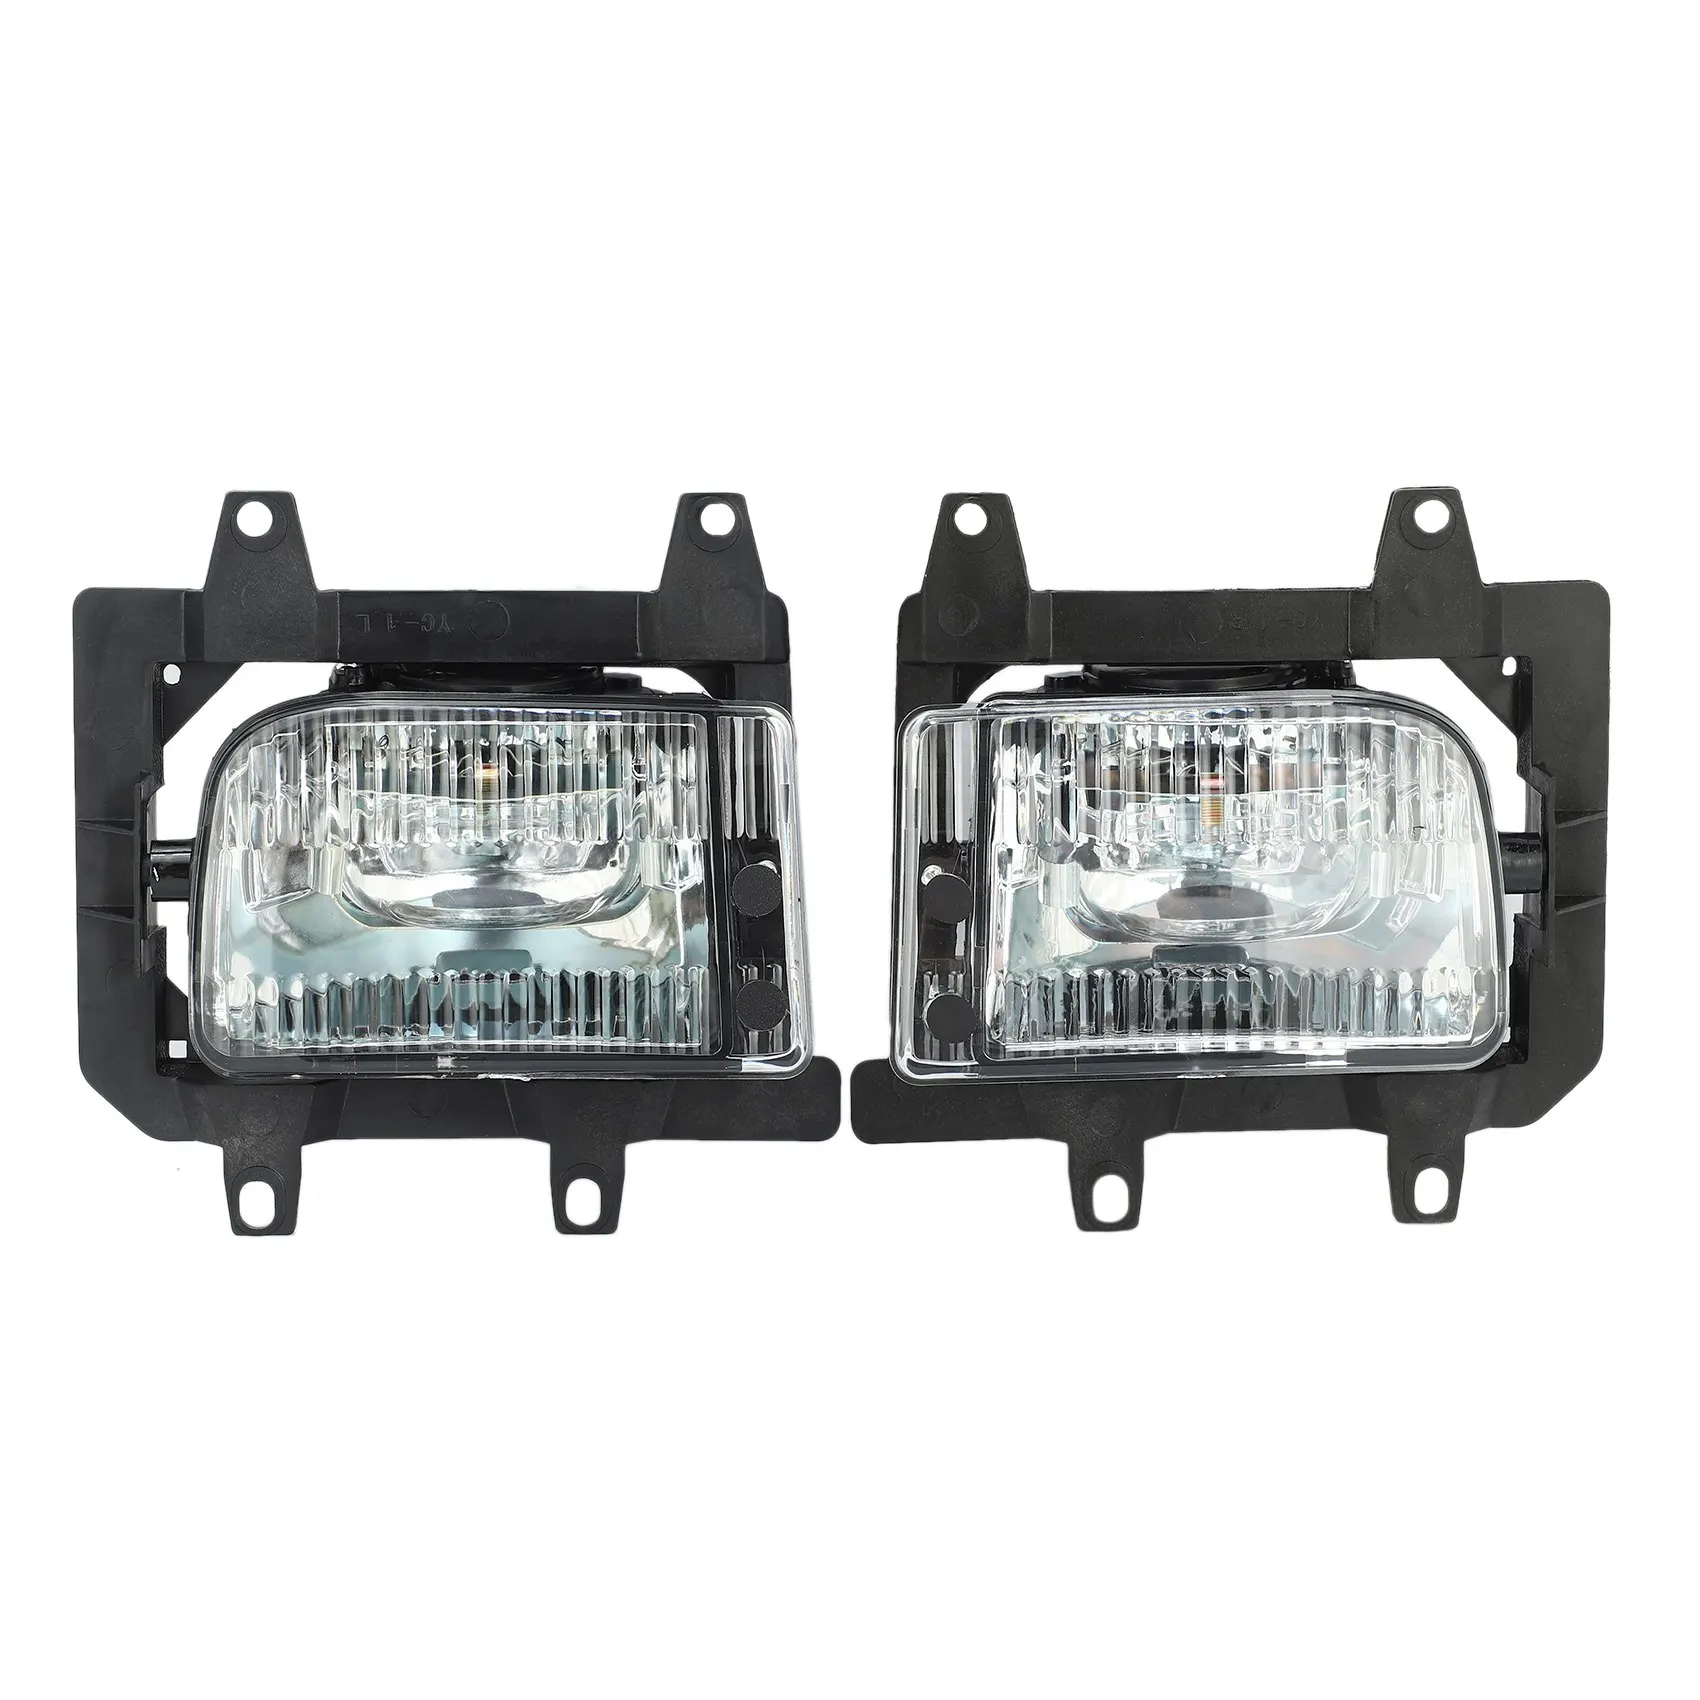 

2Pcs Crystal Clear Lens Cover Front Bumper Fog Light Lamps House For Bmw E30 318I 318Is 325I 325Is 325E 325Es 325Ix